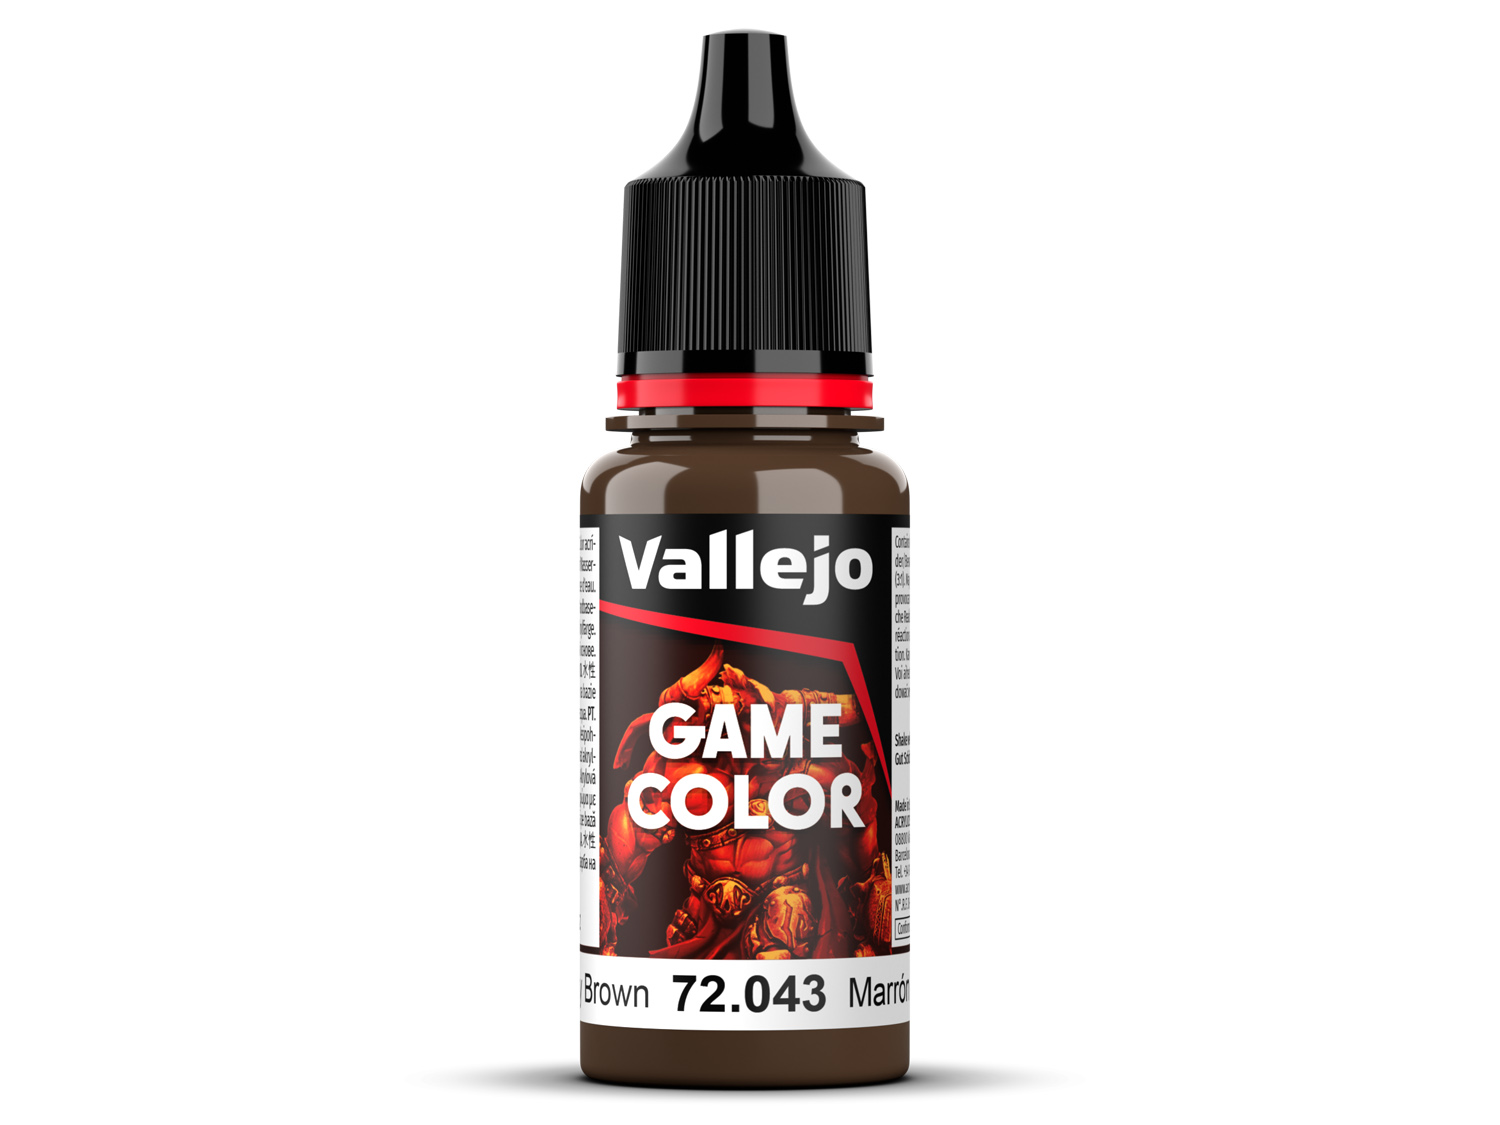 Vallejo Game Color 72043 Beasty Brown 18 ml.